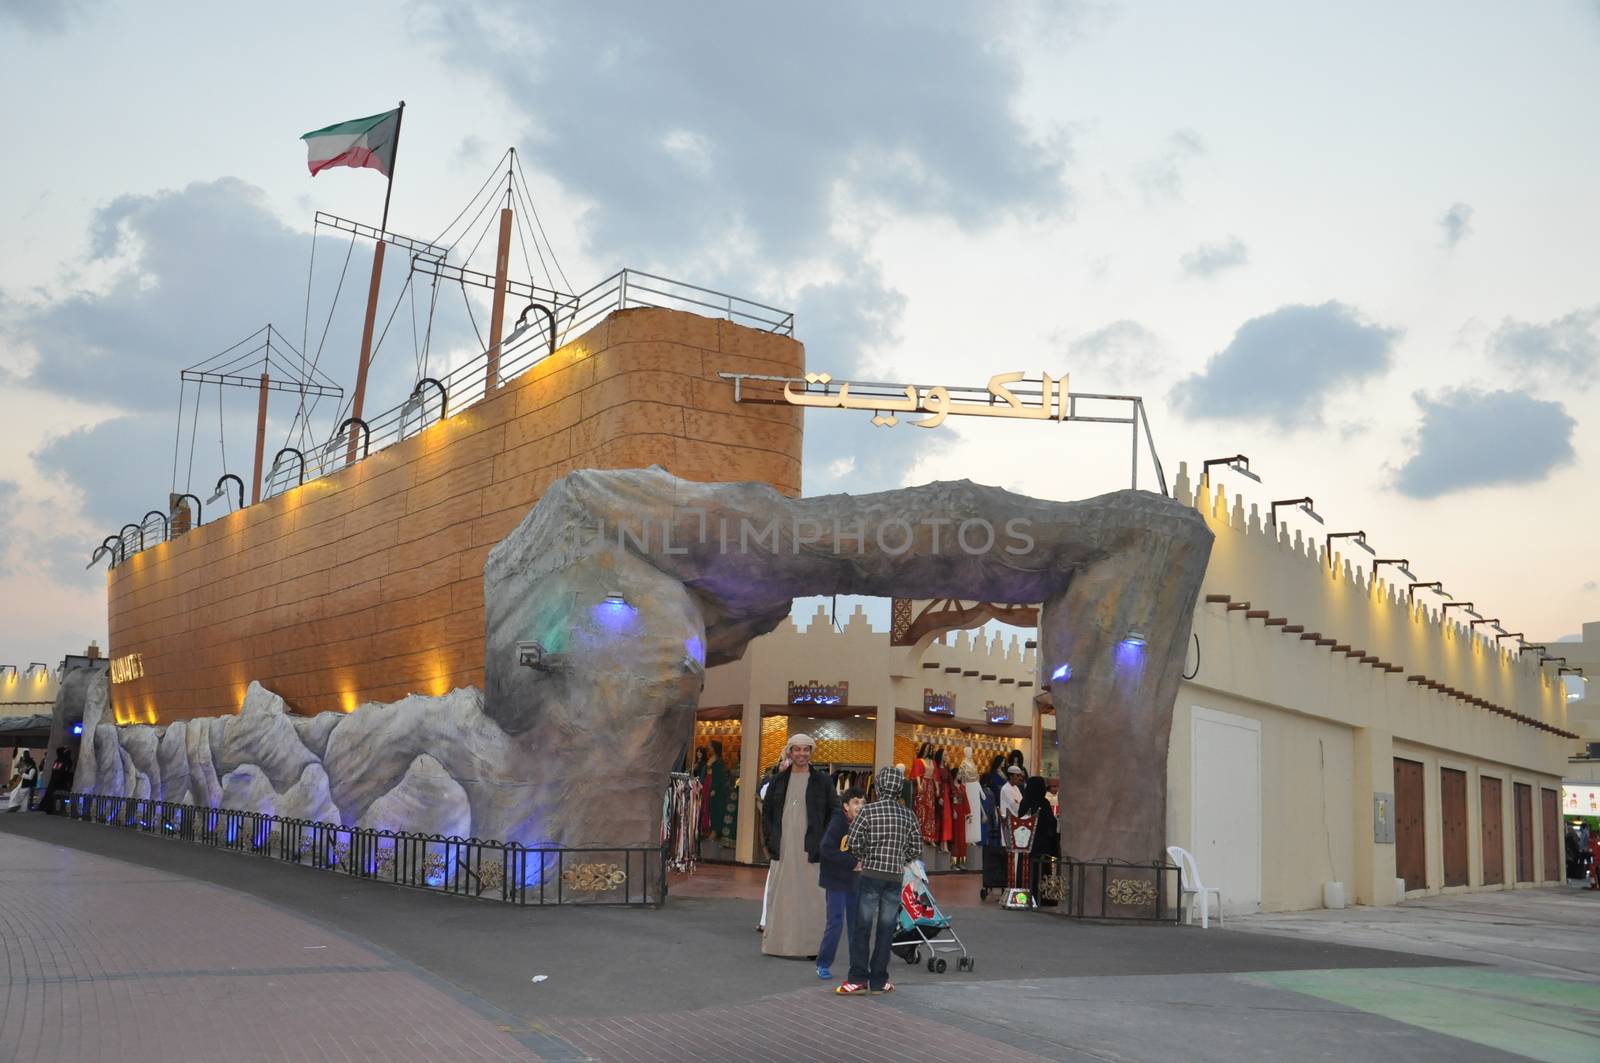 Kuwait pavilion at Global Village in Dubai, UAE. It is claimed to be the world's largest tourism, leisure and entertainment project.